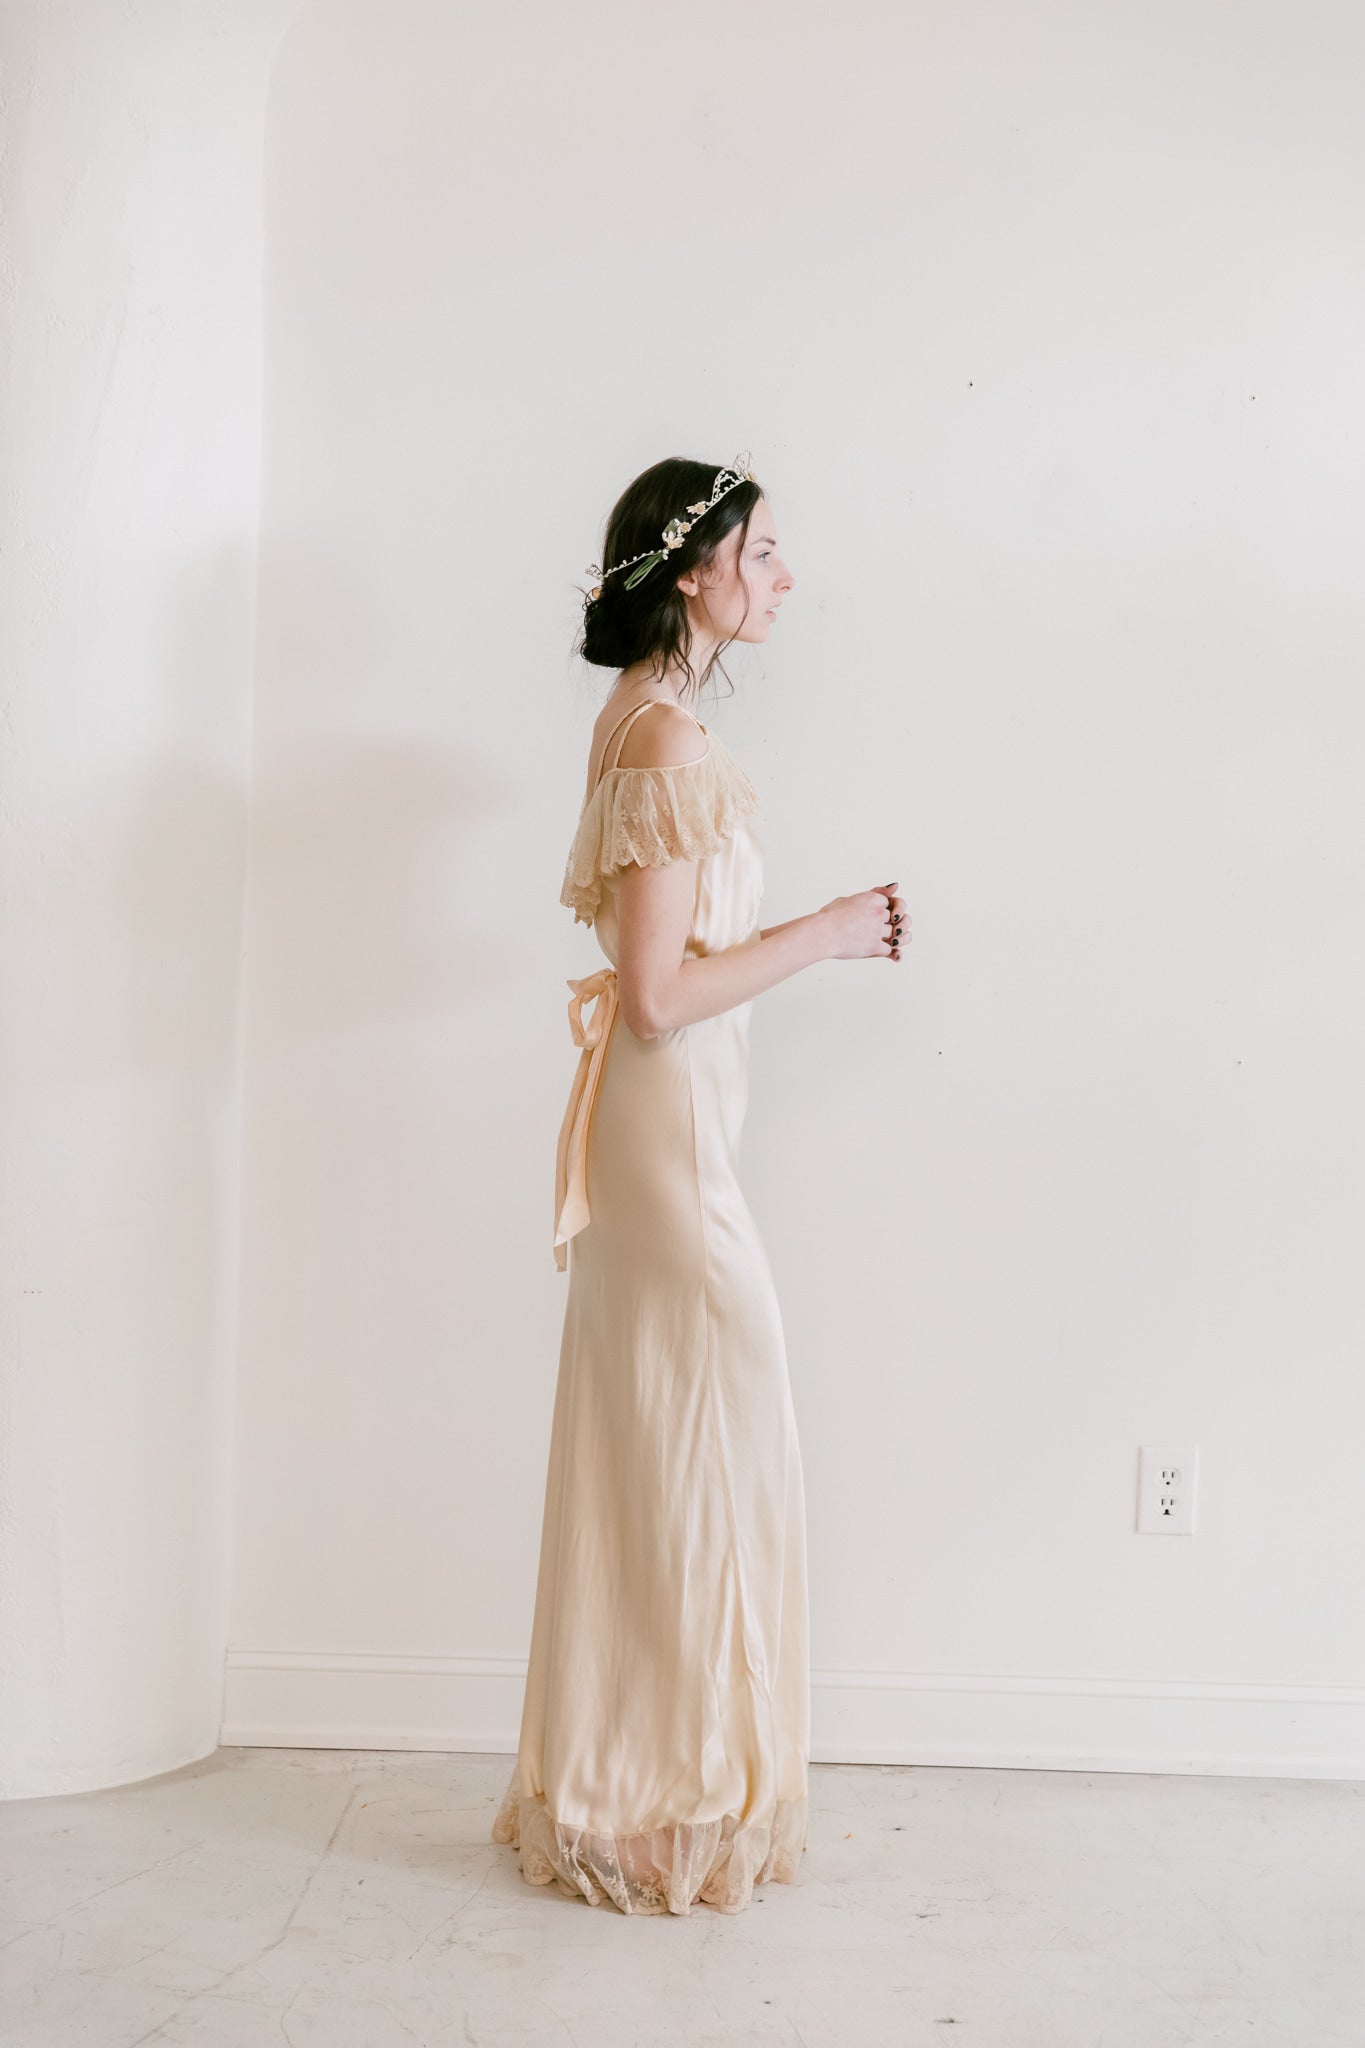 1930s golden silk braided strap + lace gown